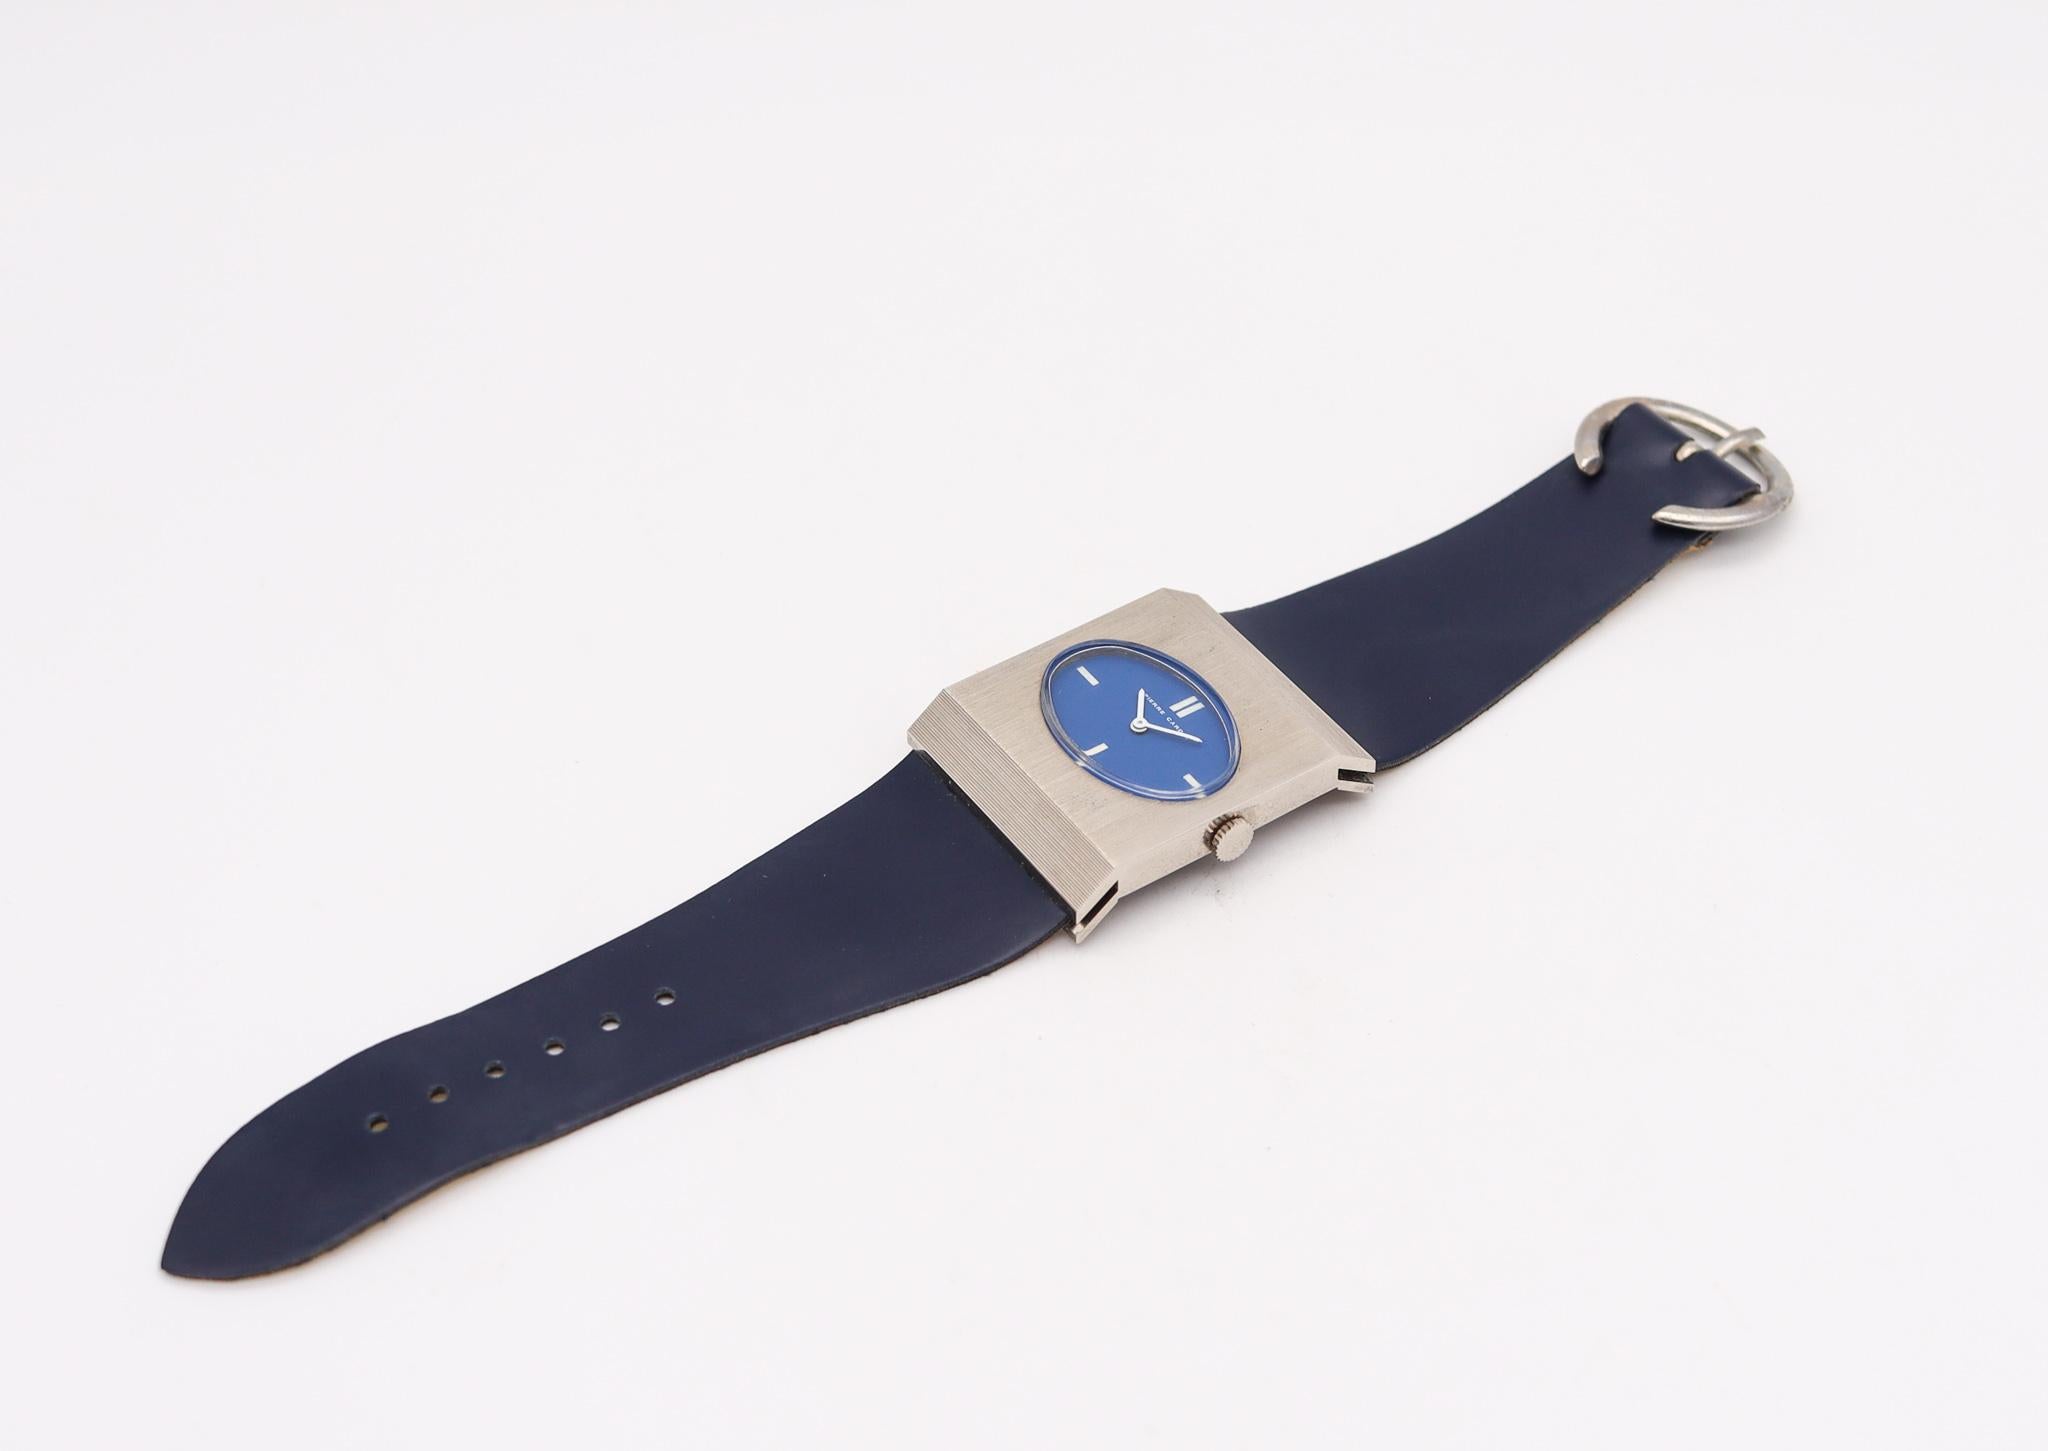 Modernist Pierre Cardin 1971 by Jaeger Lecoultre Retro PC103 Squared Wrist Watch Stainless